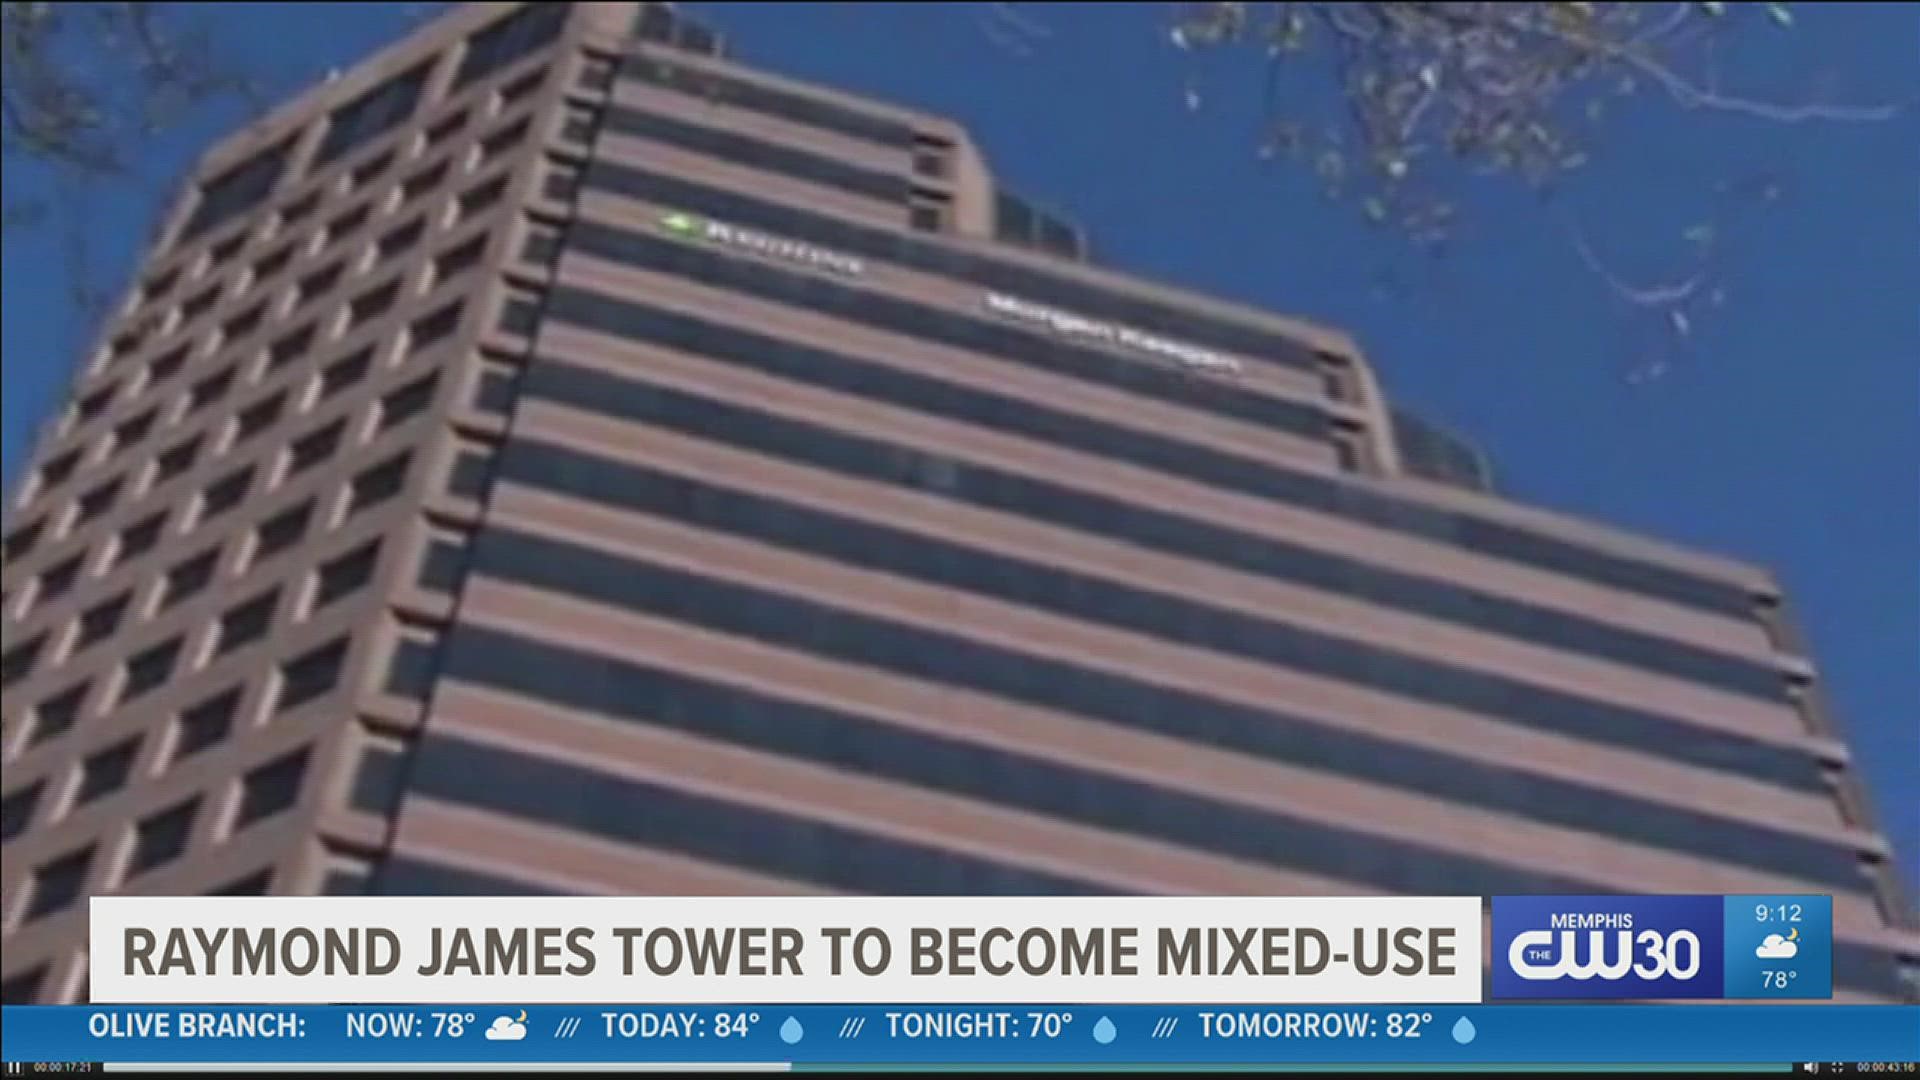 Due to not as much demand office space, the Raymond James Tower will be getting some new changes.